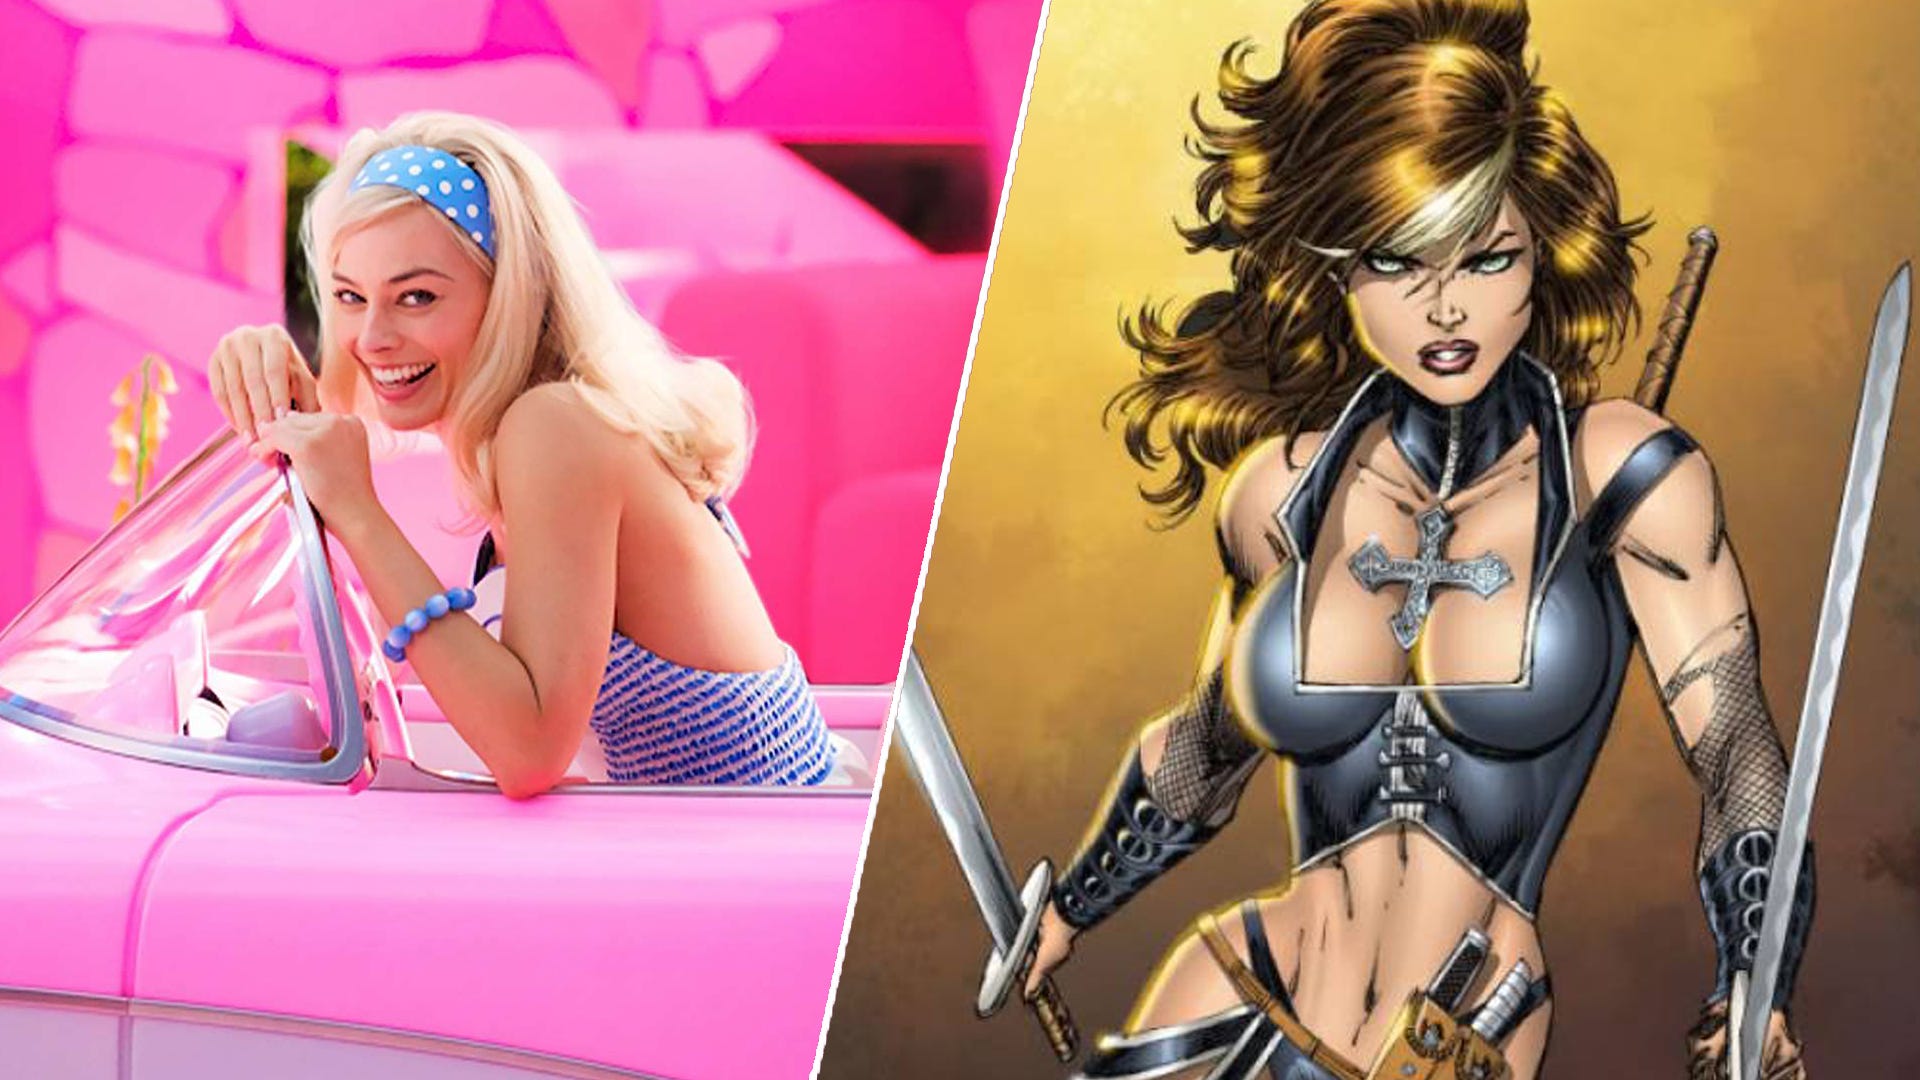 From saving Barbie Land to fighting demons, Margot Robbie’s next role looks set to be a character from the creator of Deadpool